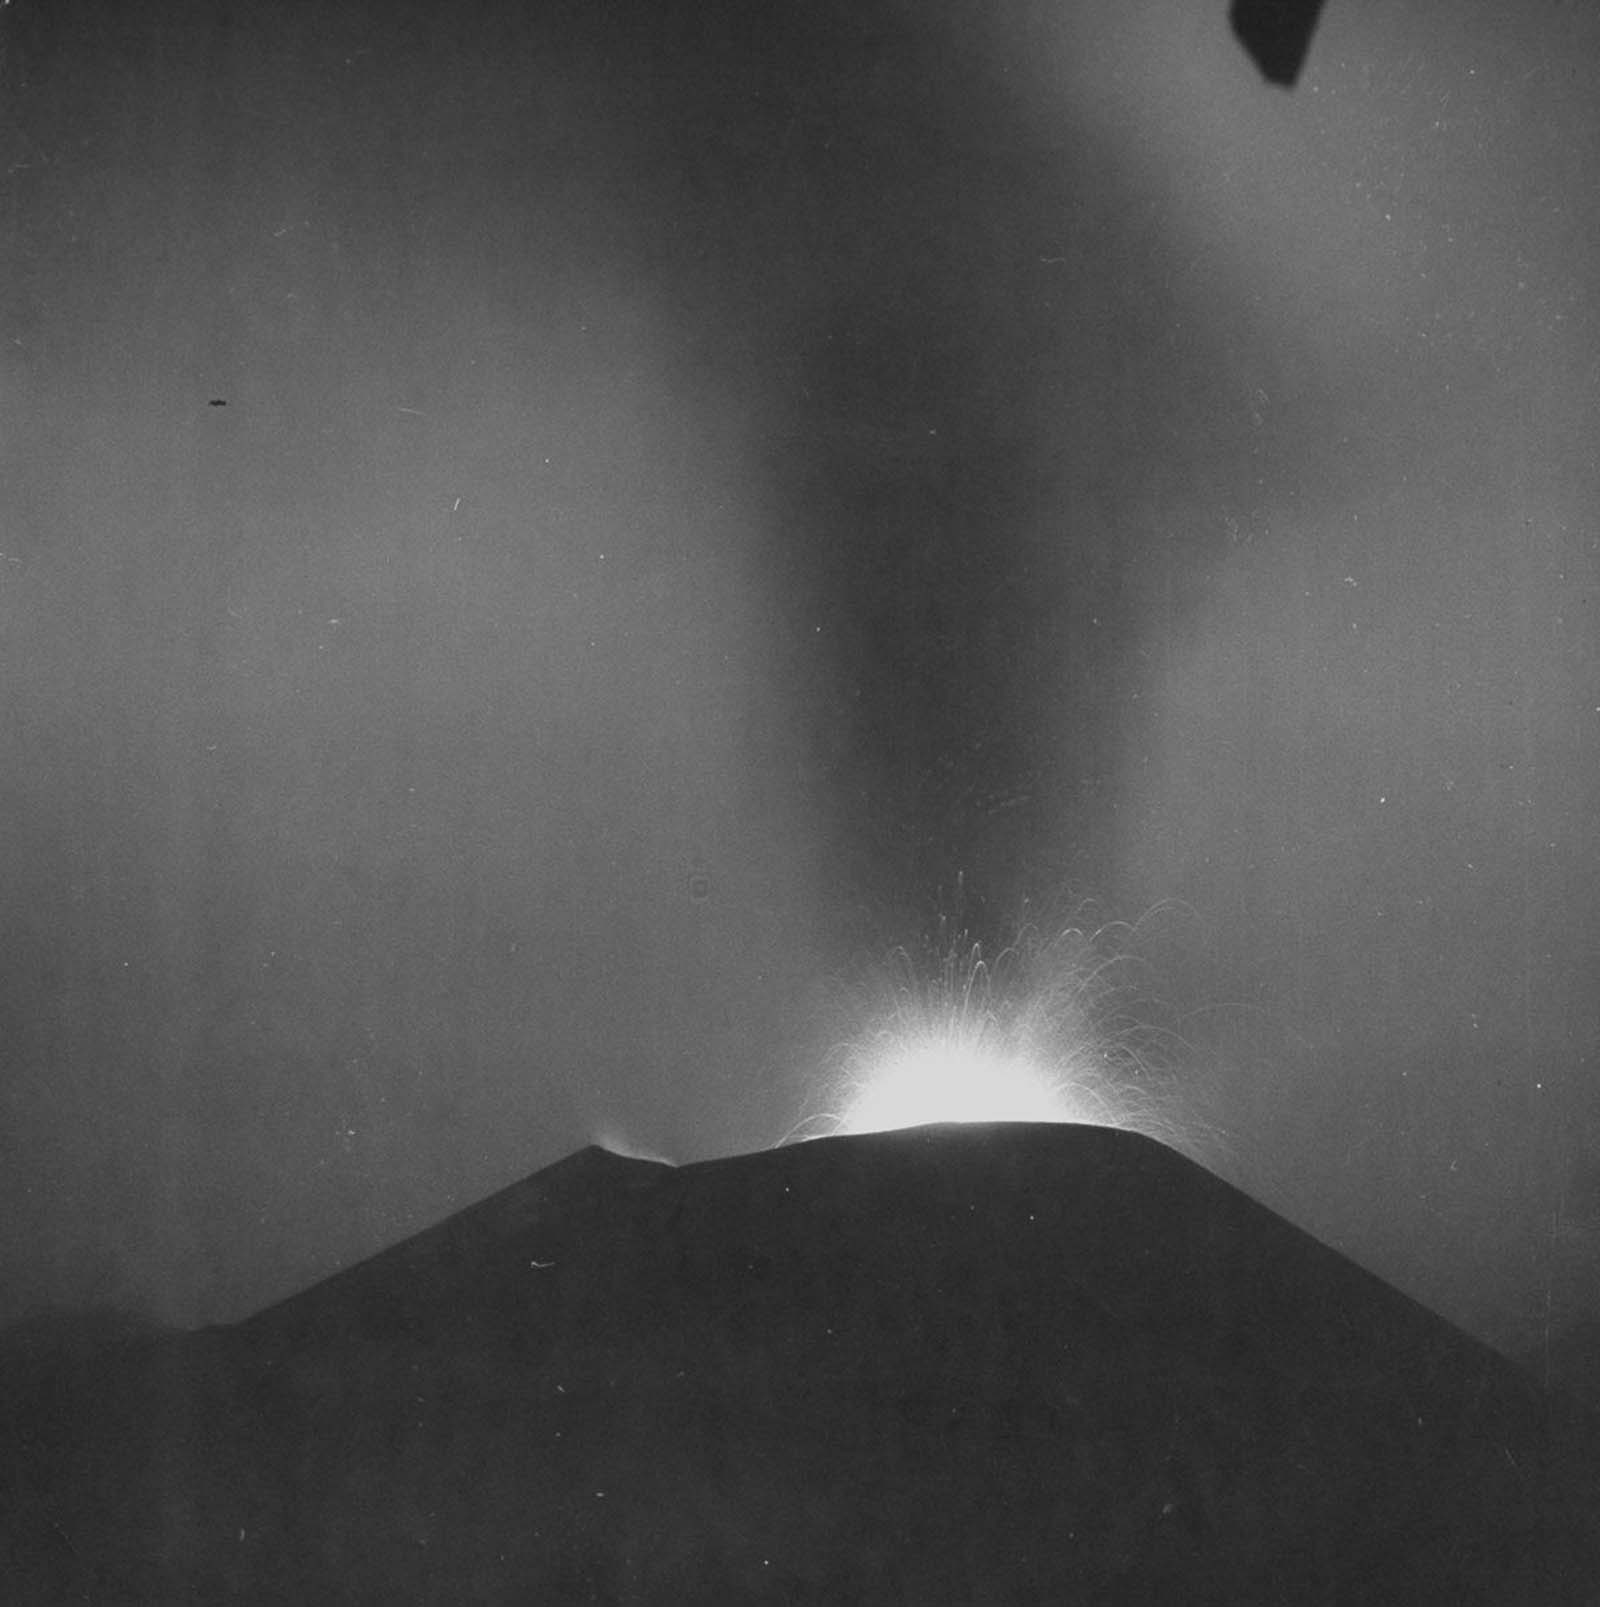 Rare Photos Documenting the Eruption of Parícutin volcano in 1943